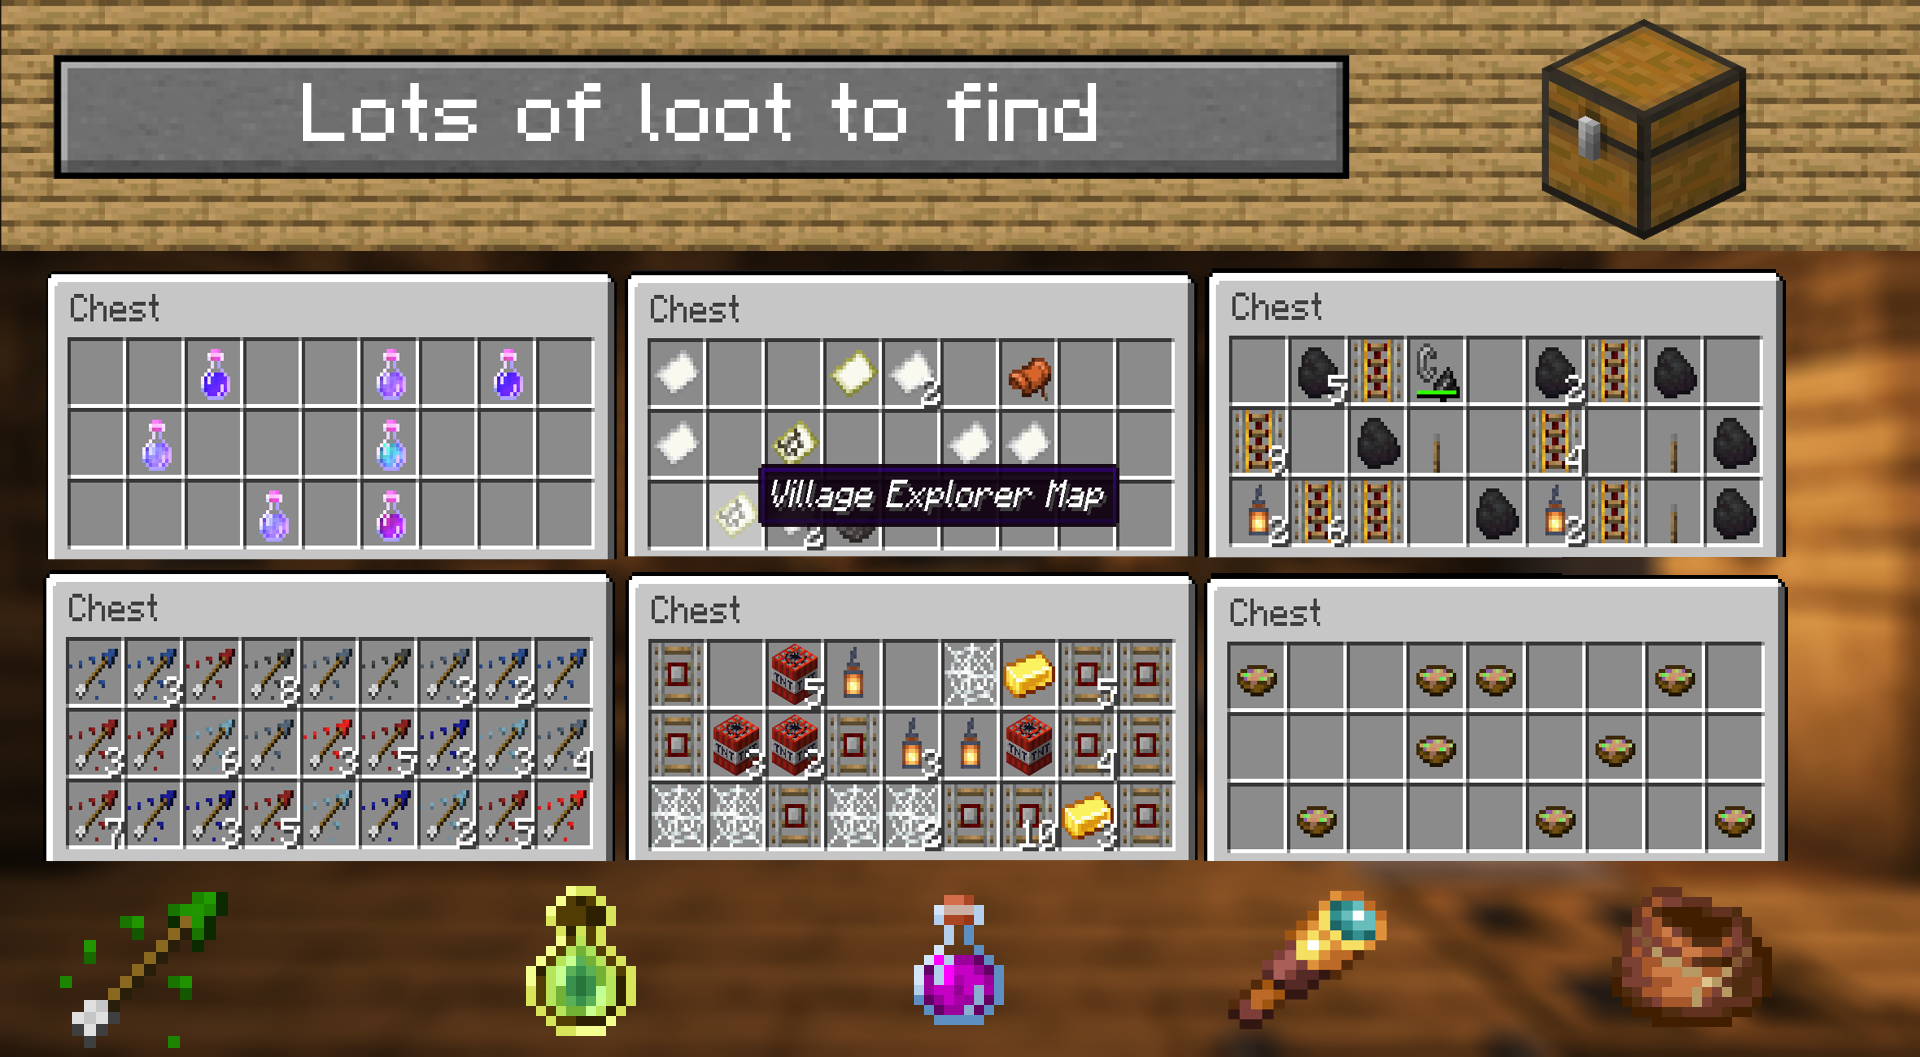 Lots of loot to find